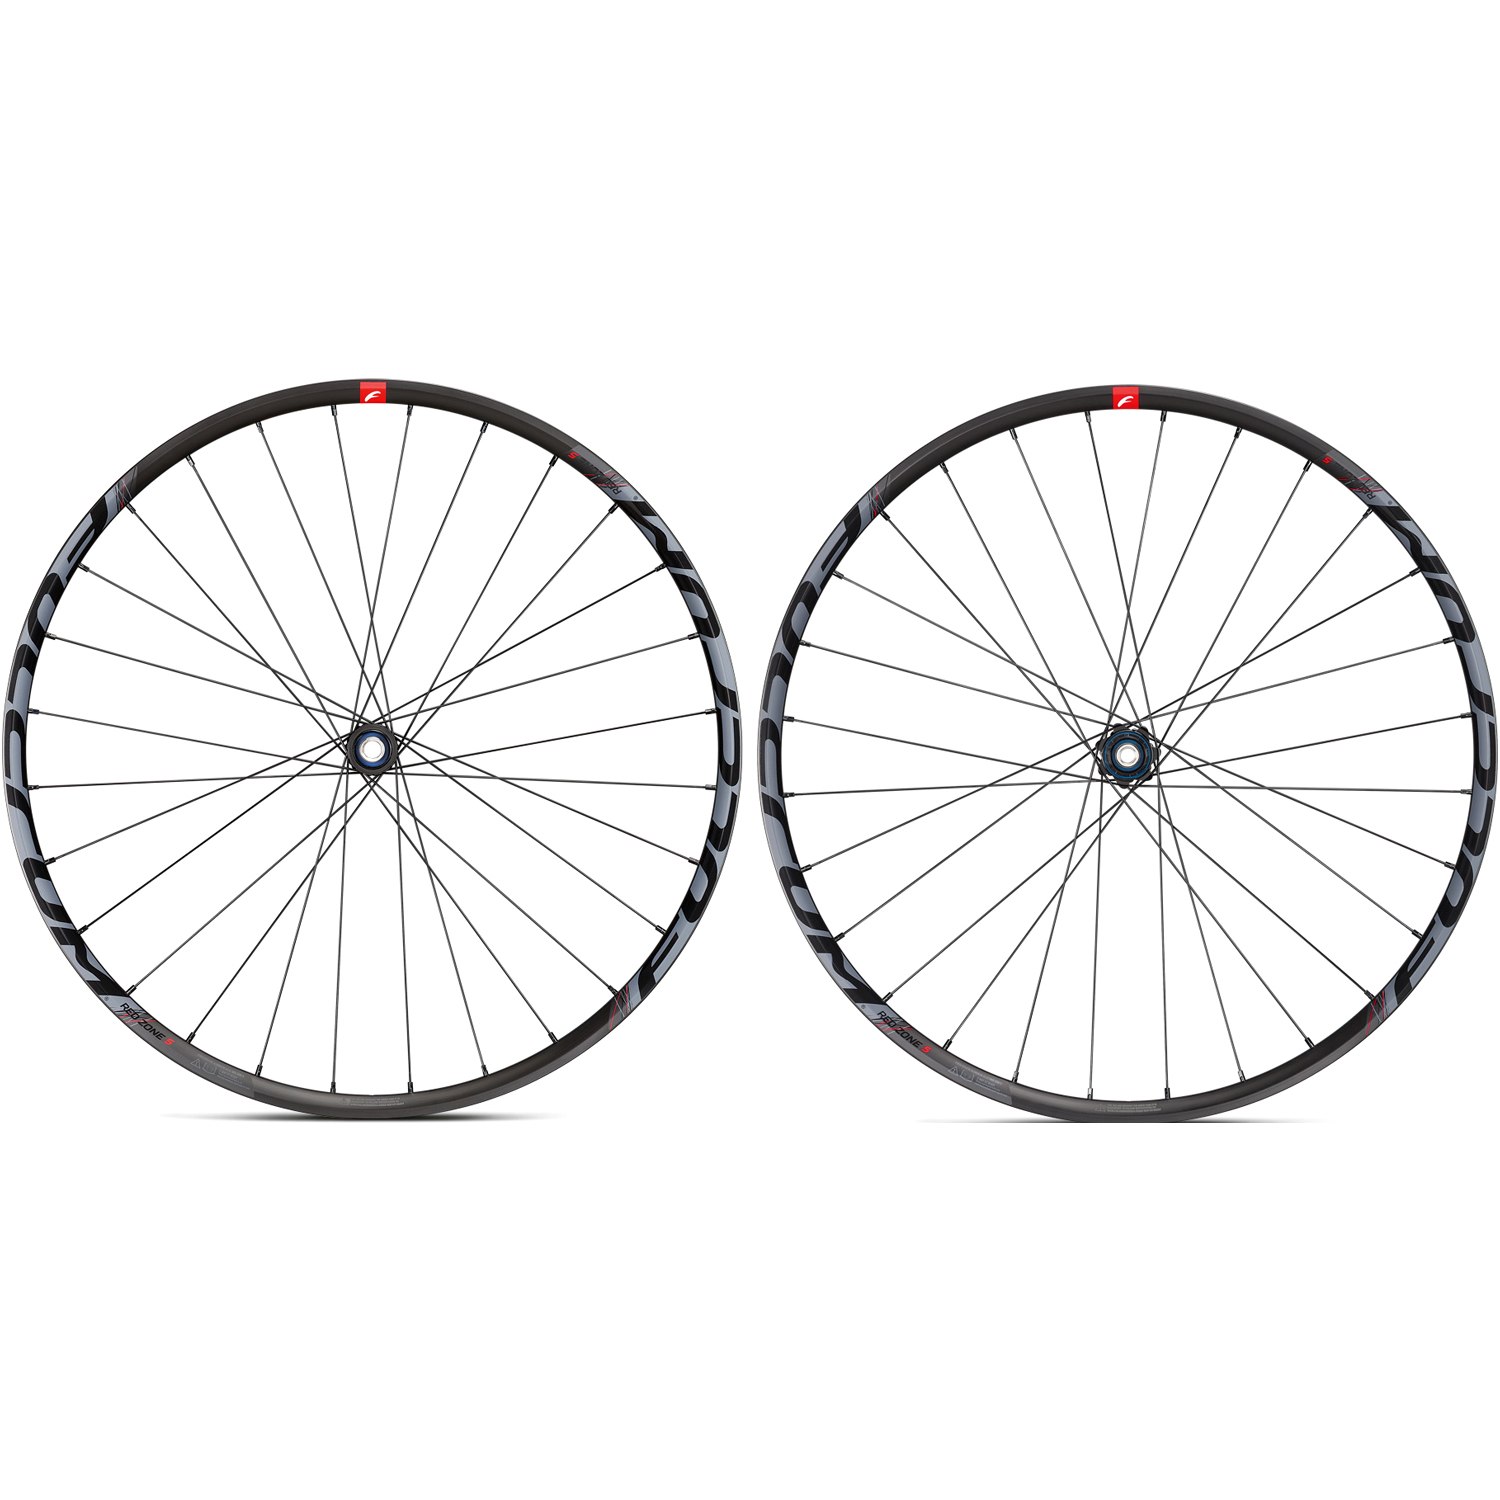 Picture of Fulcrum Red Zone 5 27.5 Inches MTB Wheelset - Centerlock - FW: 15x110mm | RW: 12x/148mm Boost